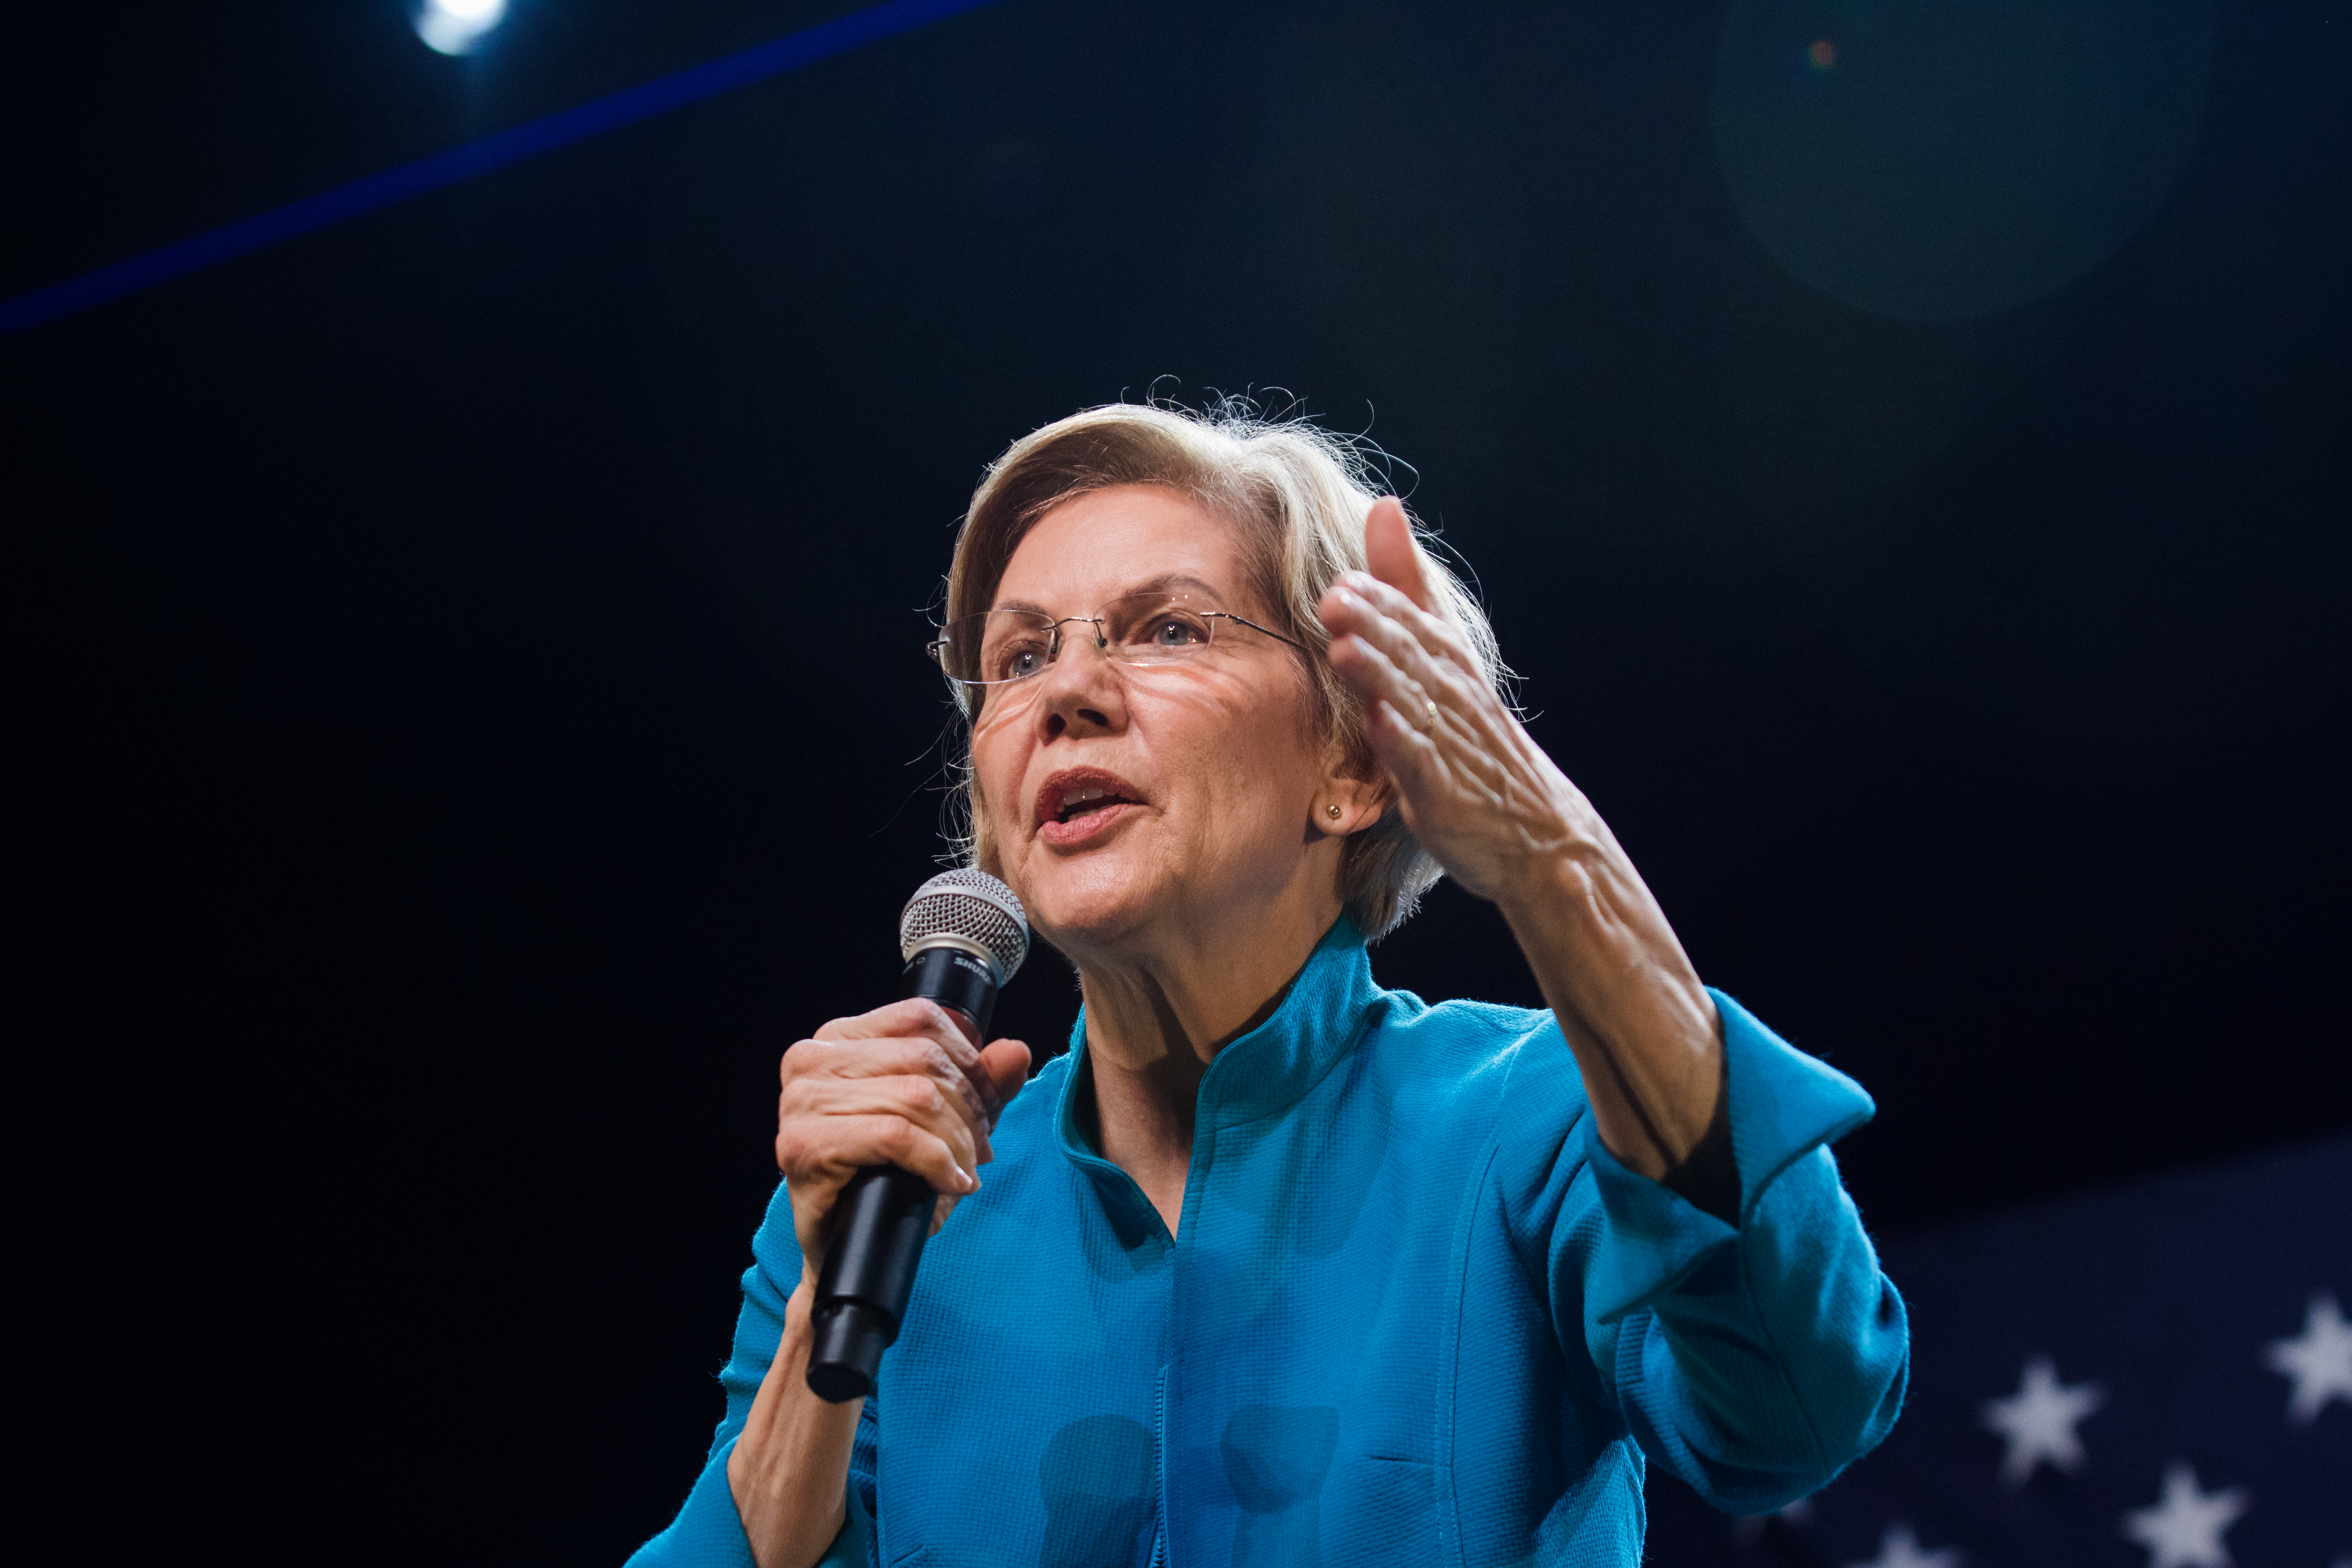 Warren has raised the most funds from individual donations in Brooklyn out of the race's candidates.